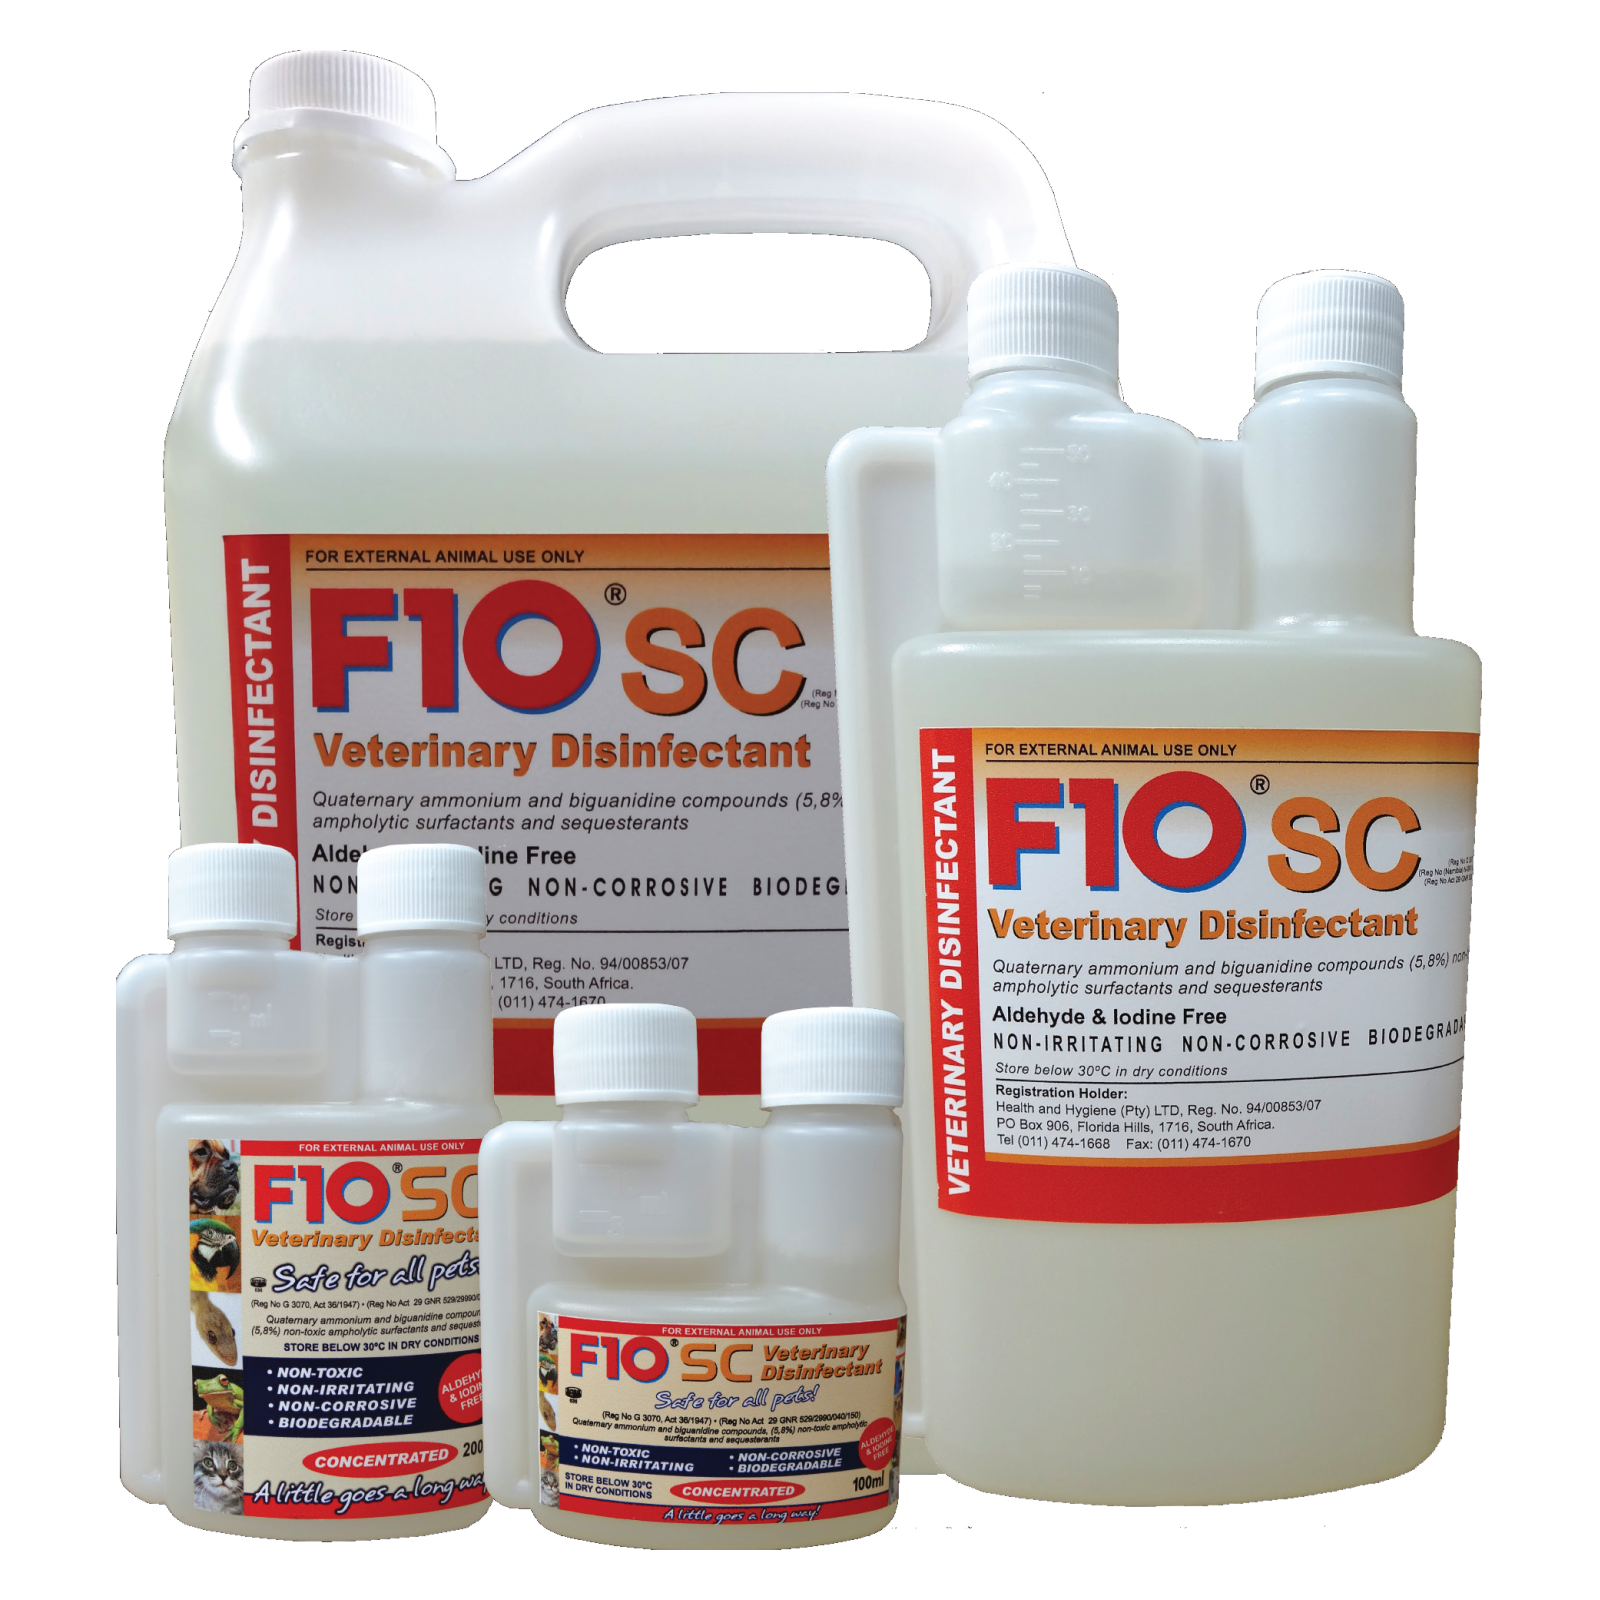 A group picture of the four different sizes of bottle of F10SC